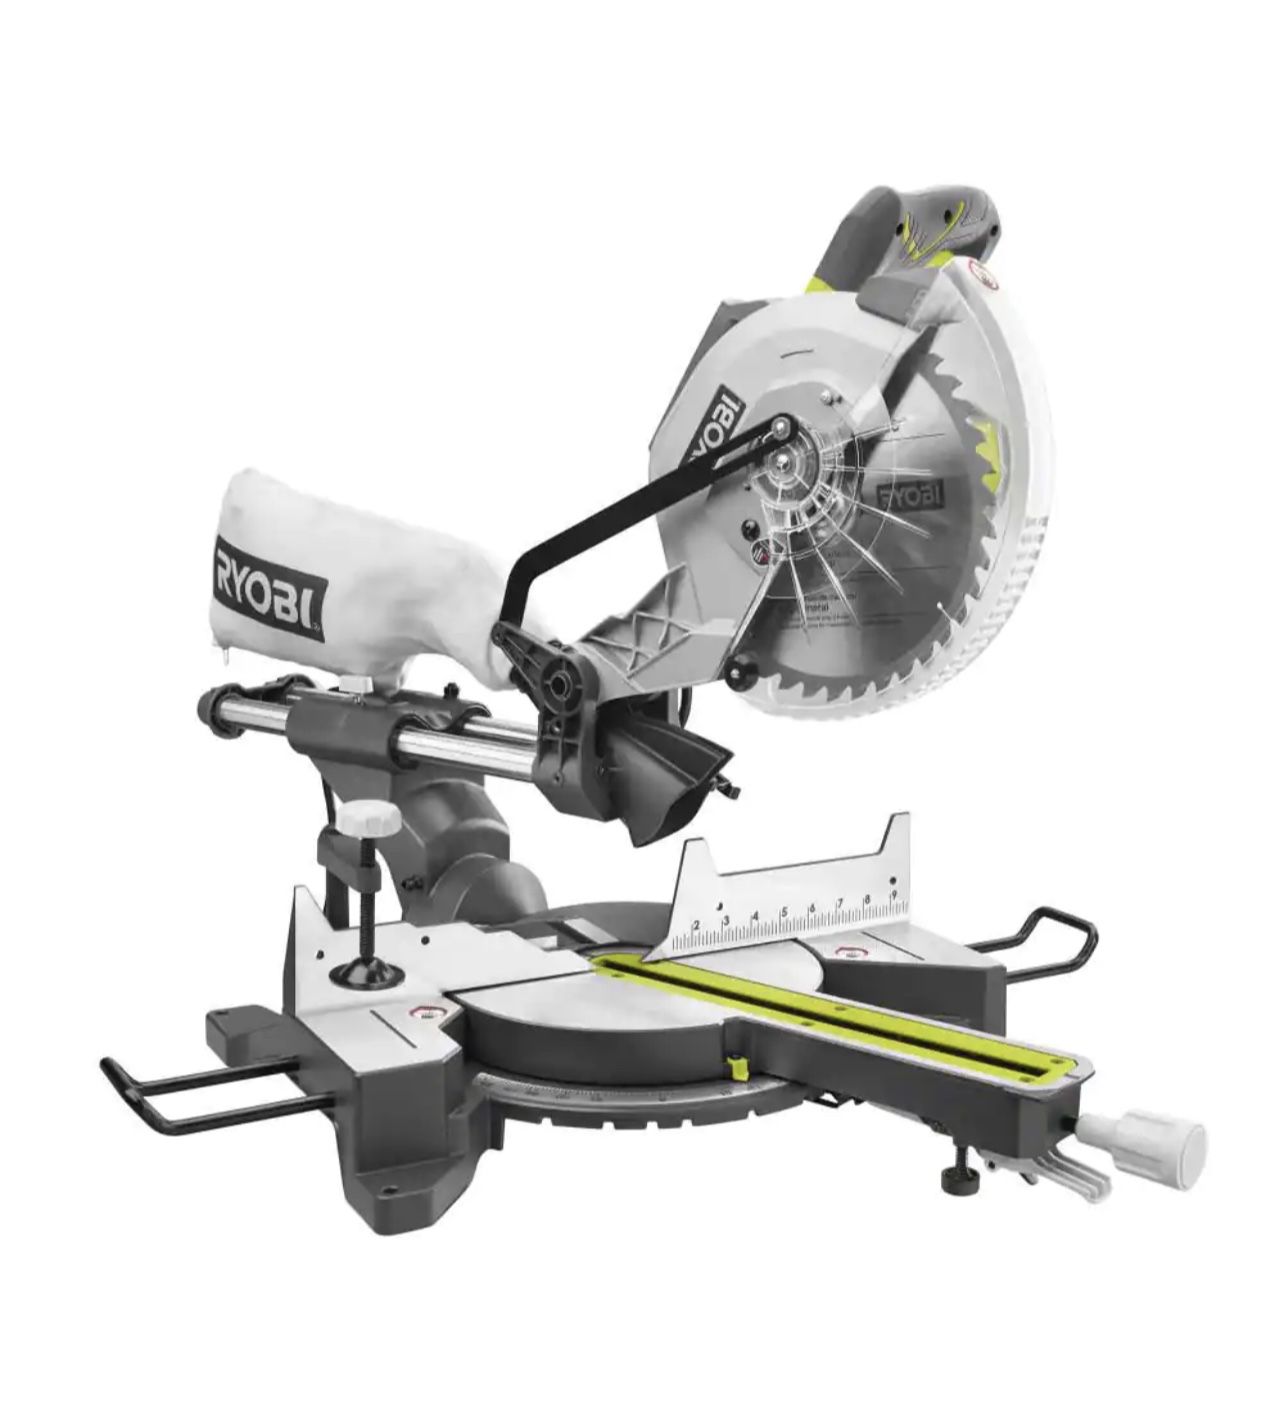 RYOBI 15 Amp 10 in. Corded Sliding Compound Miter Saw with LED Cutline